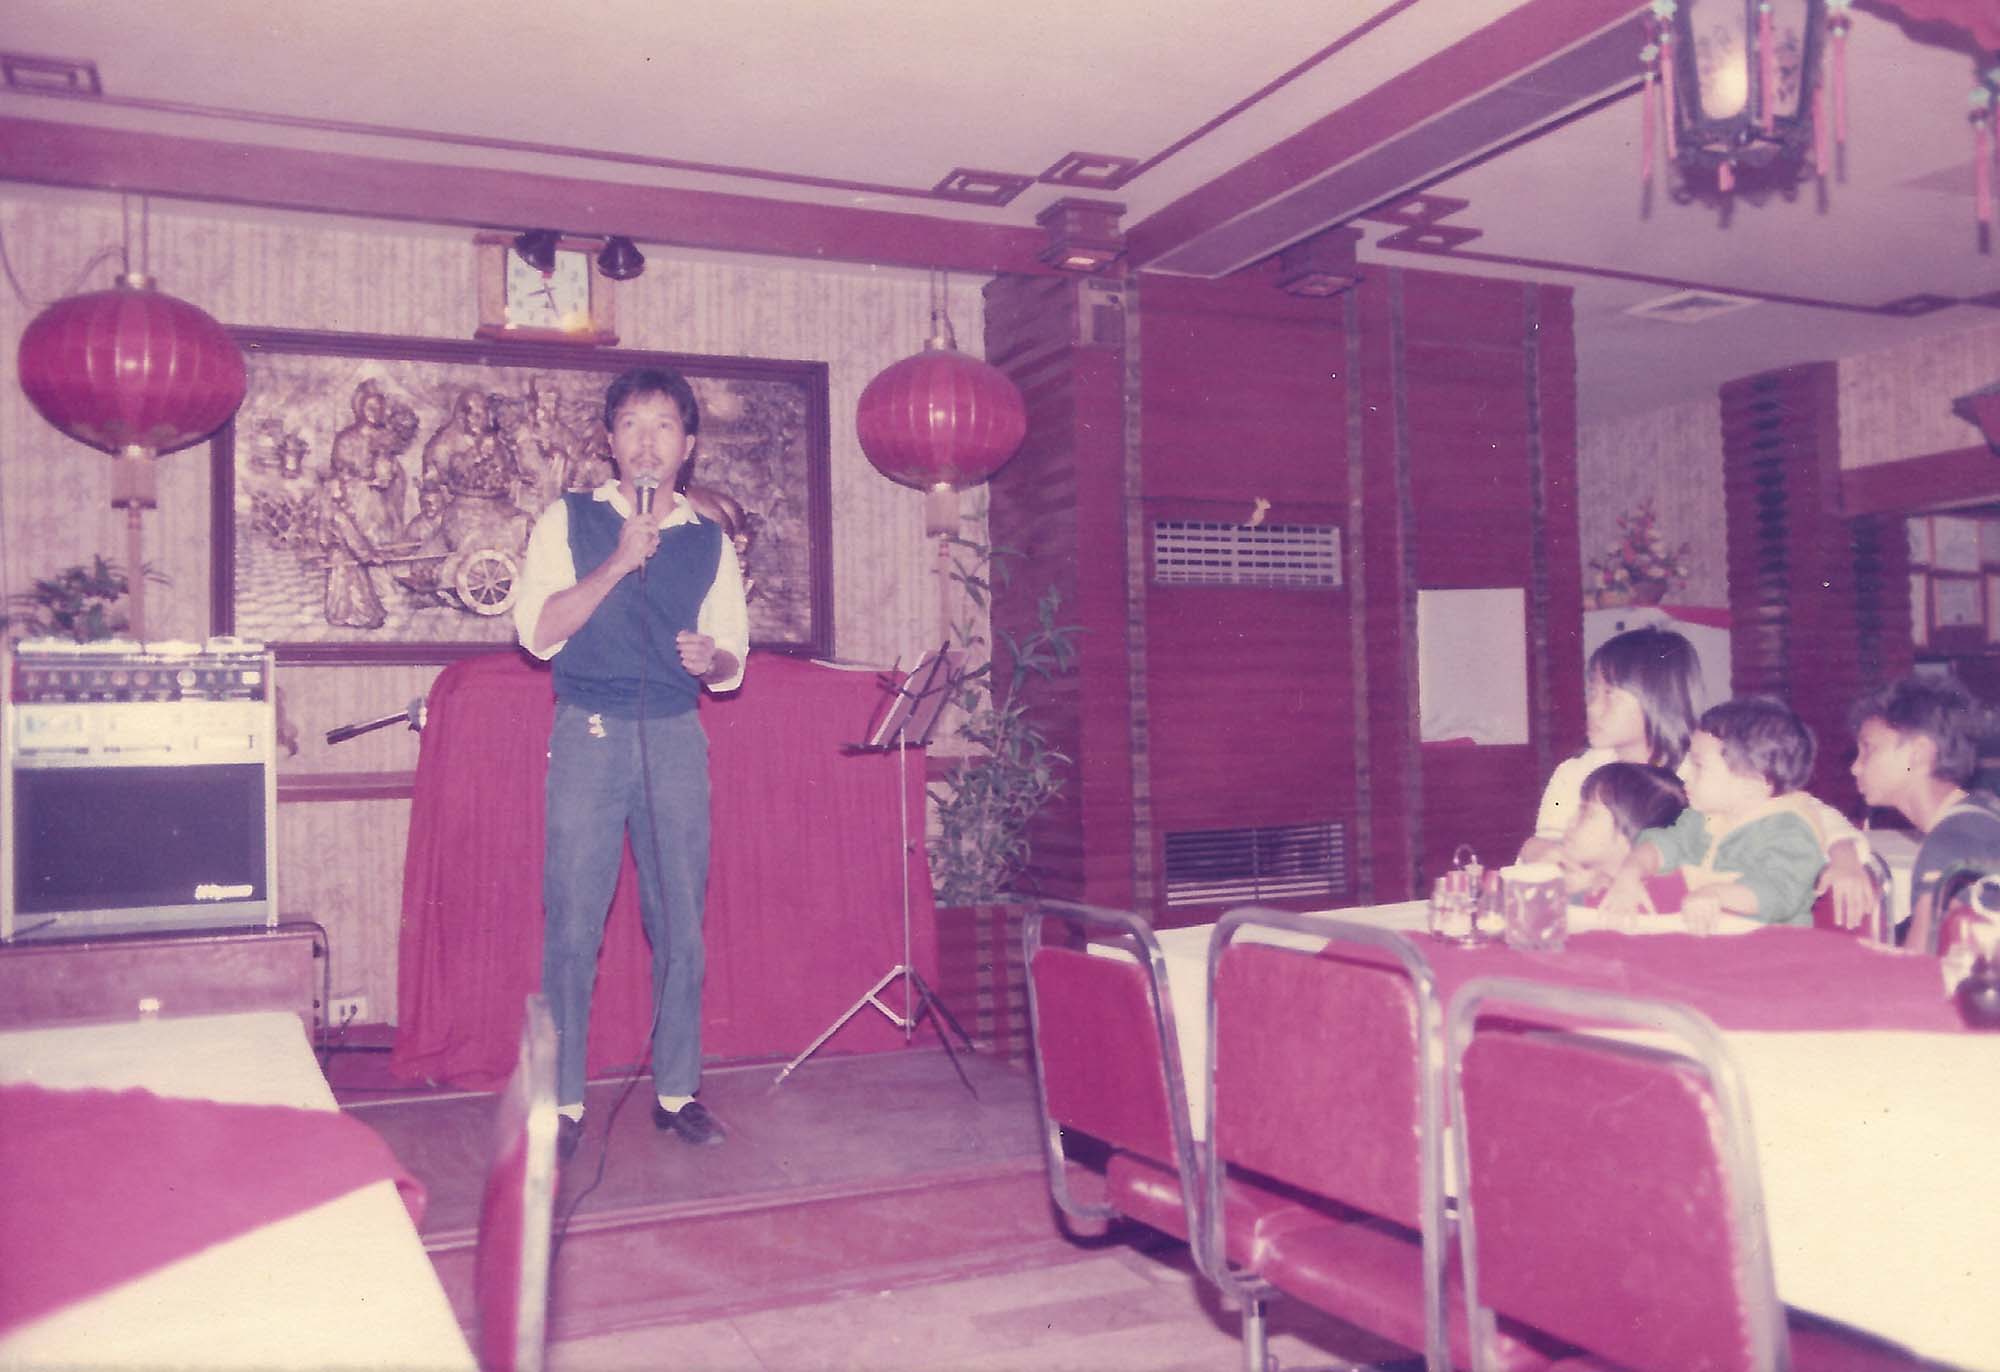 Vintage photo of a man singing karaoke at a Filipino restaurant in the 1980s. A group of children seated at a table look on.